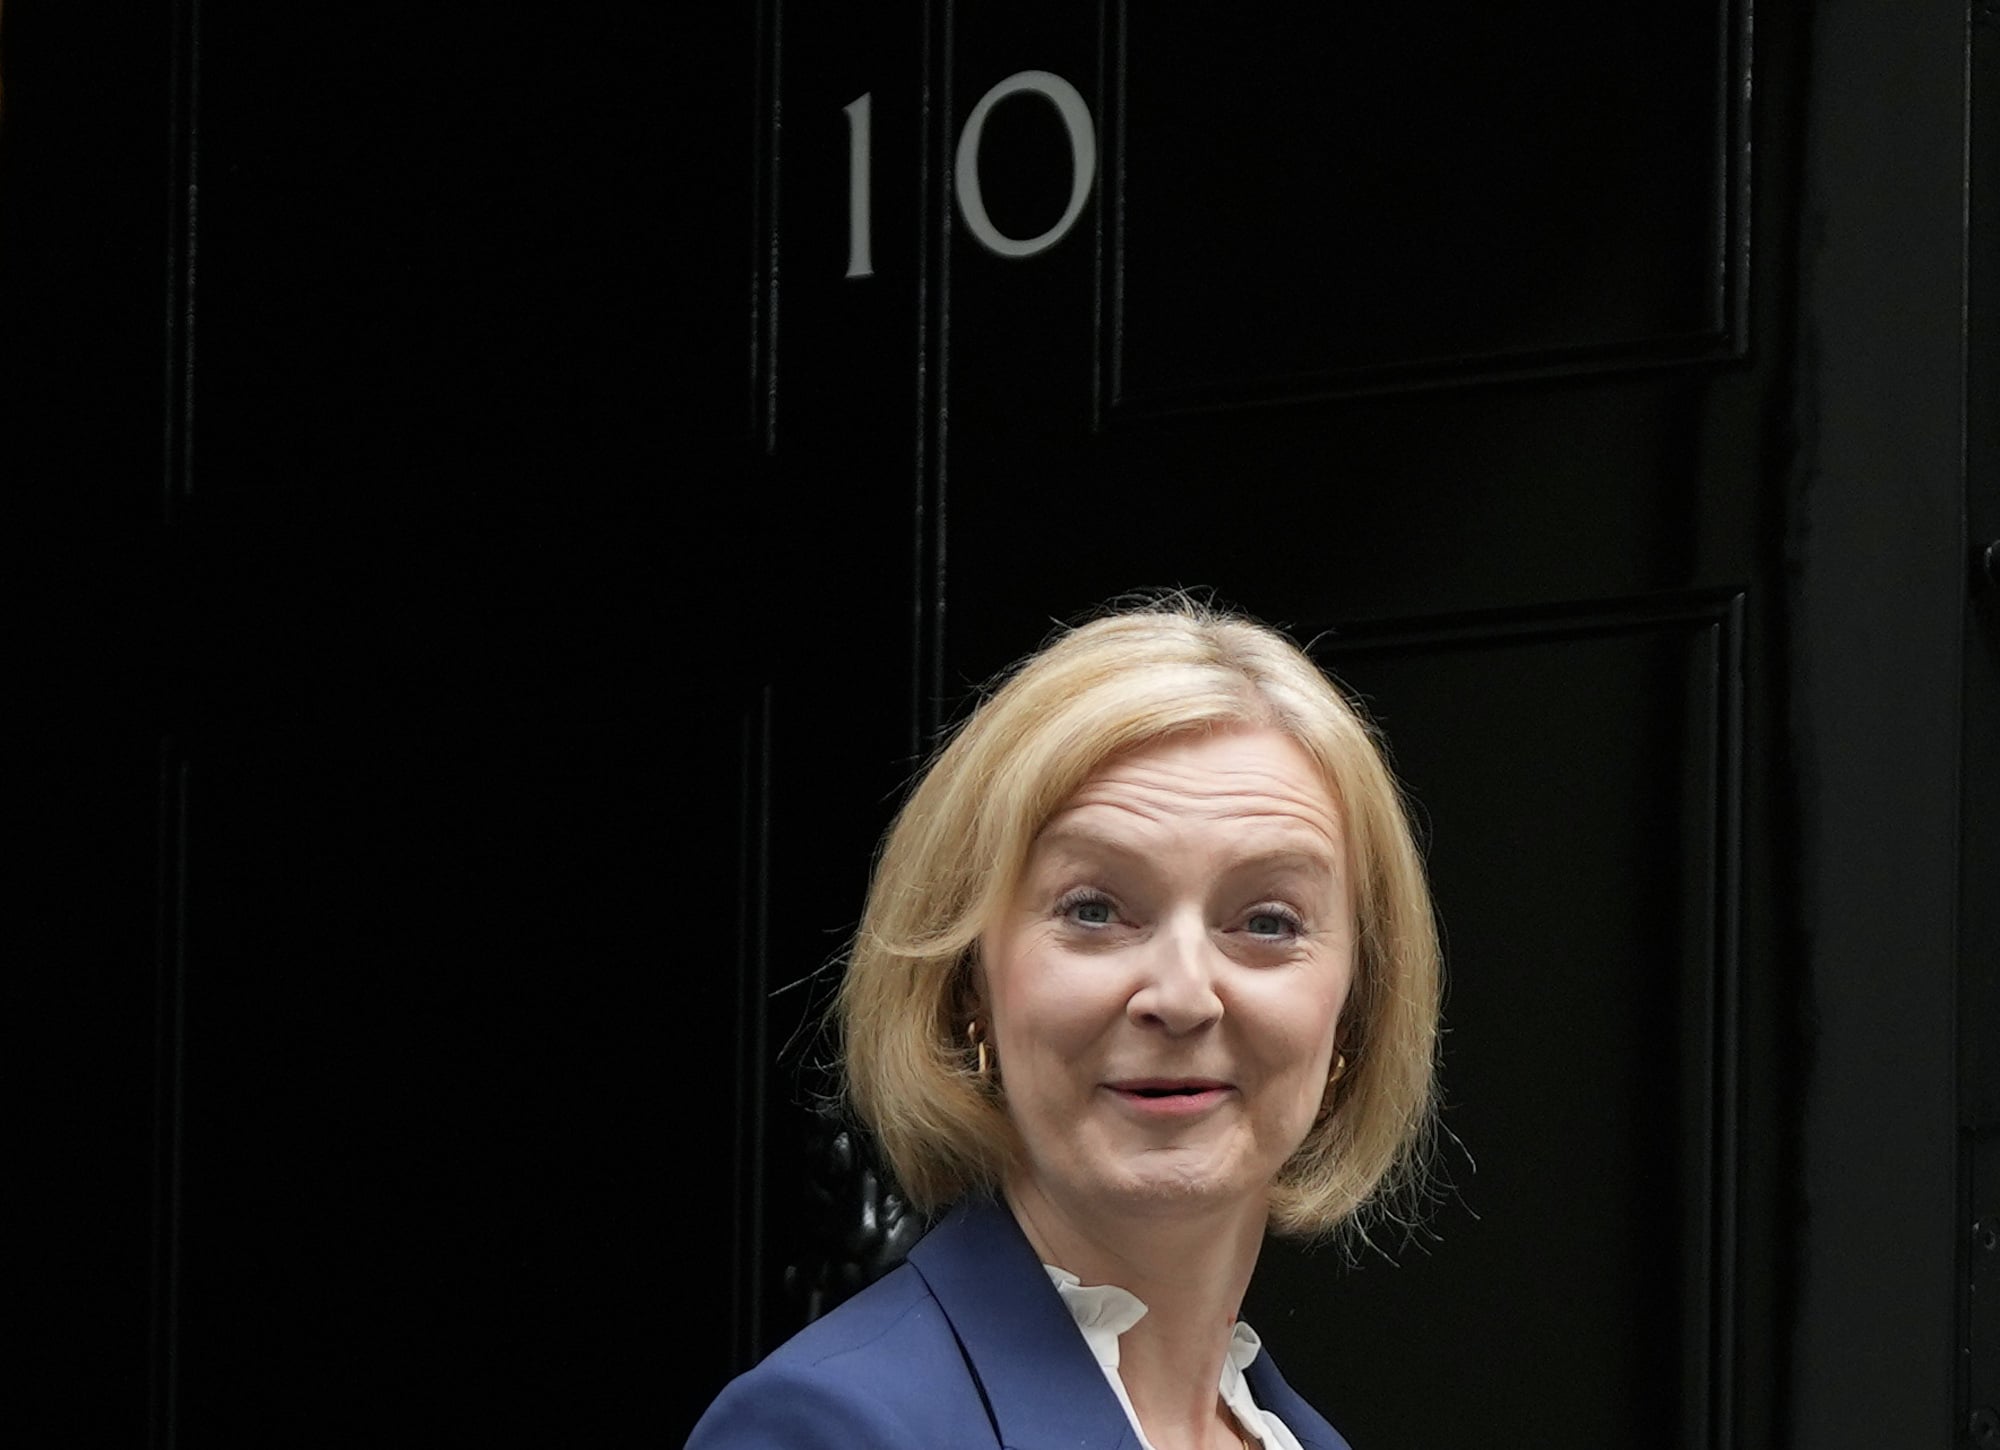 FILE - British Prime Minister Liz Truss leaves 10 Downing Street to attend her first Prime Minister's Questions at the Houses of Parliament, in London, Wednesday, Sept. 7, 2022. On Thursday, Oct. 20, 2022 Truss quit after losing support of Conservative lawmakers following weeks of turmoil over botched economic plan. (AP Photo/Frank Augstein, File)